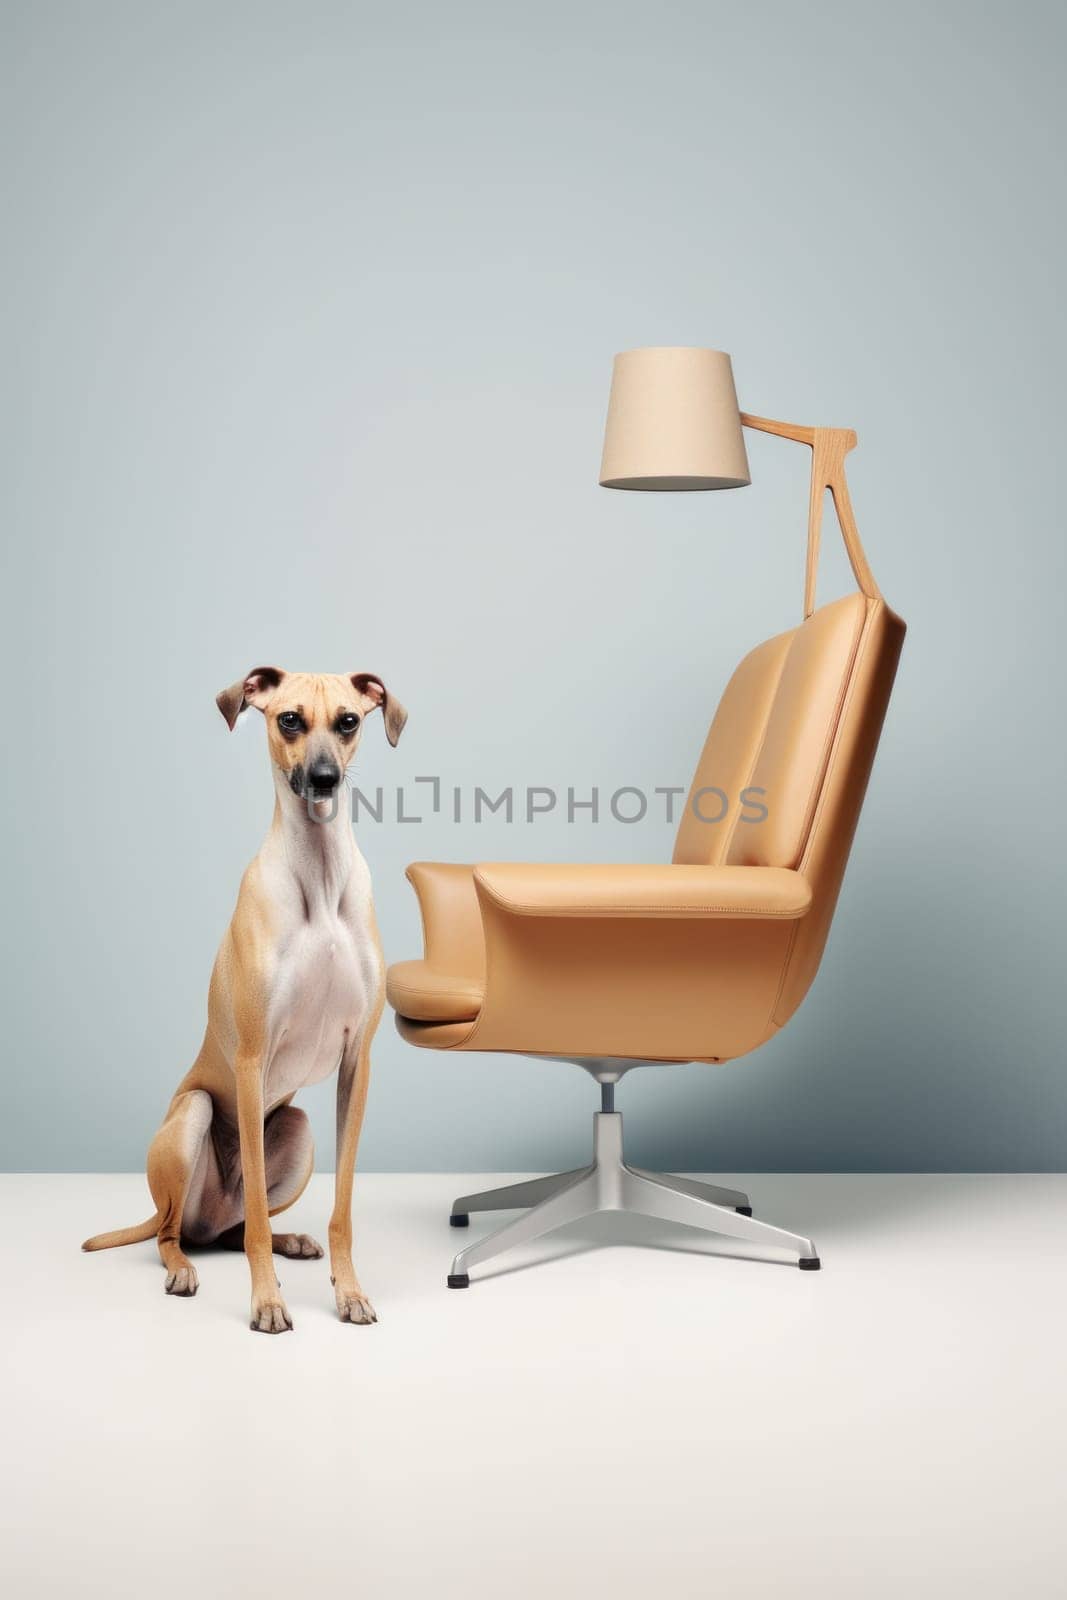 A dog sitting in a chair next to a lamp